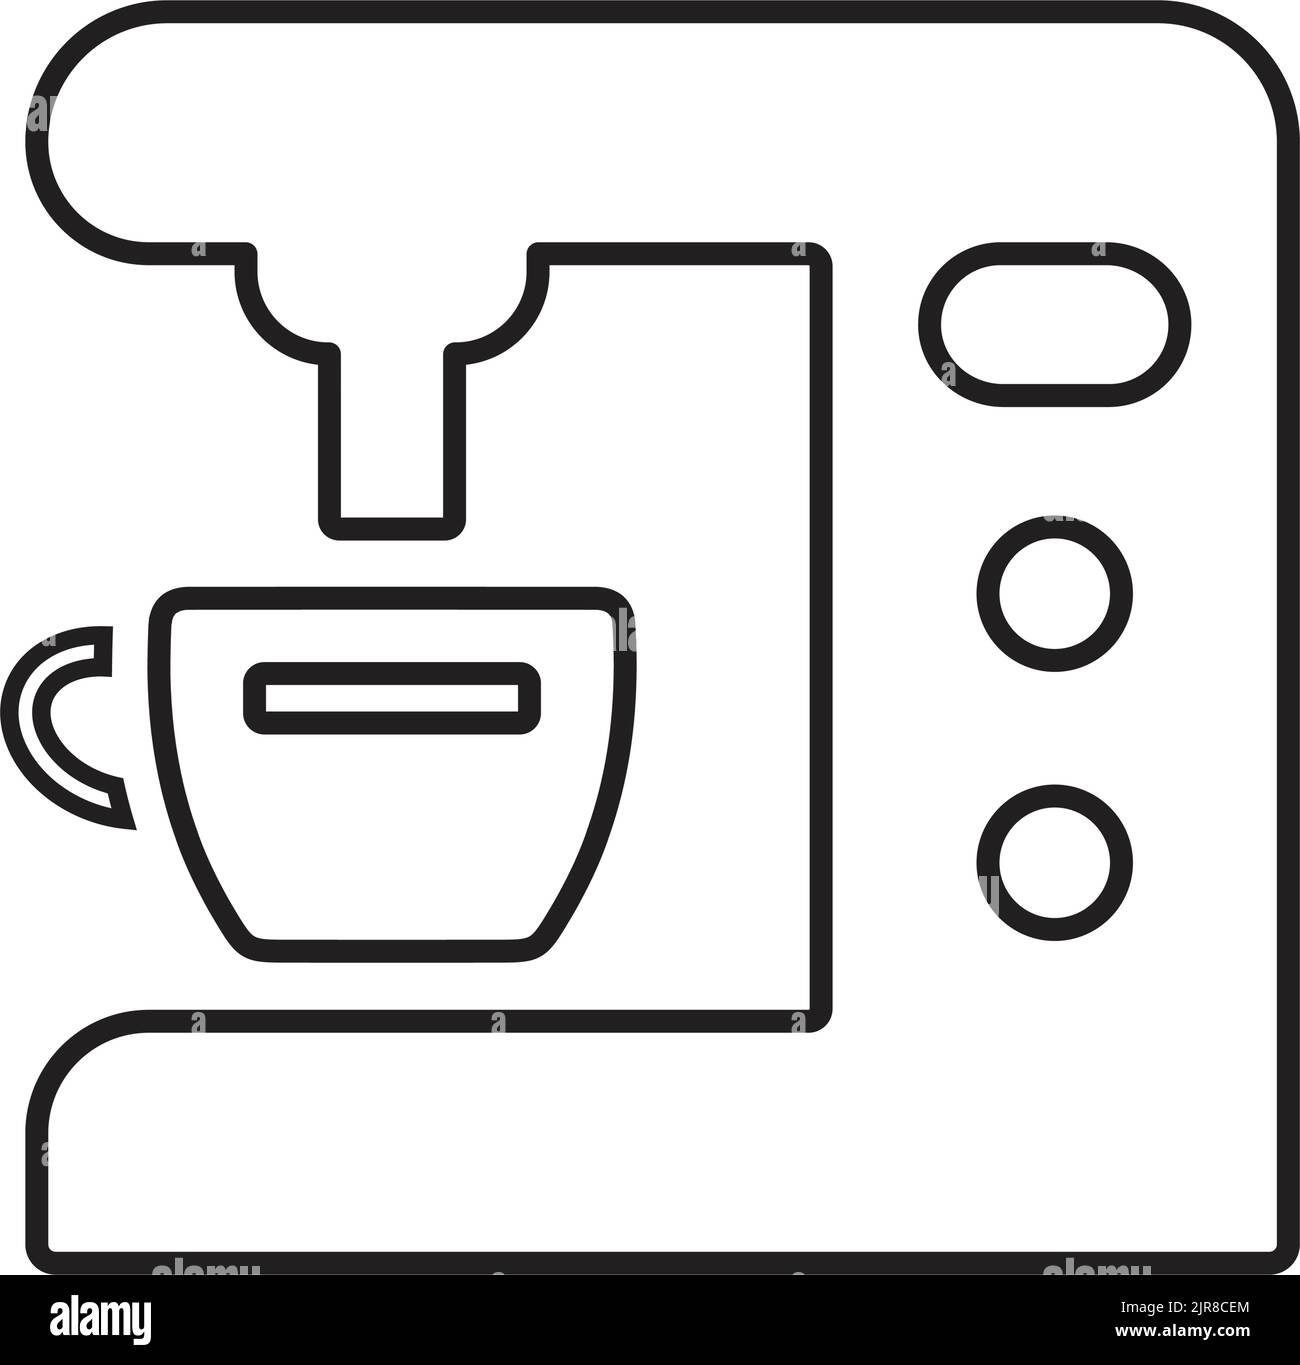 https://c8.alamy.com/comp/2JR8CEM/coffee-machine-maker-icon-use-for-commercial-purposes-print-media-web-or-any-type-of-design-projects-vector-eps-file-2JR8CEM.jpg